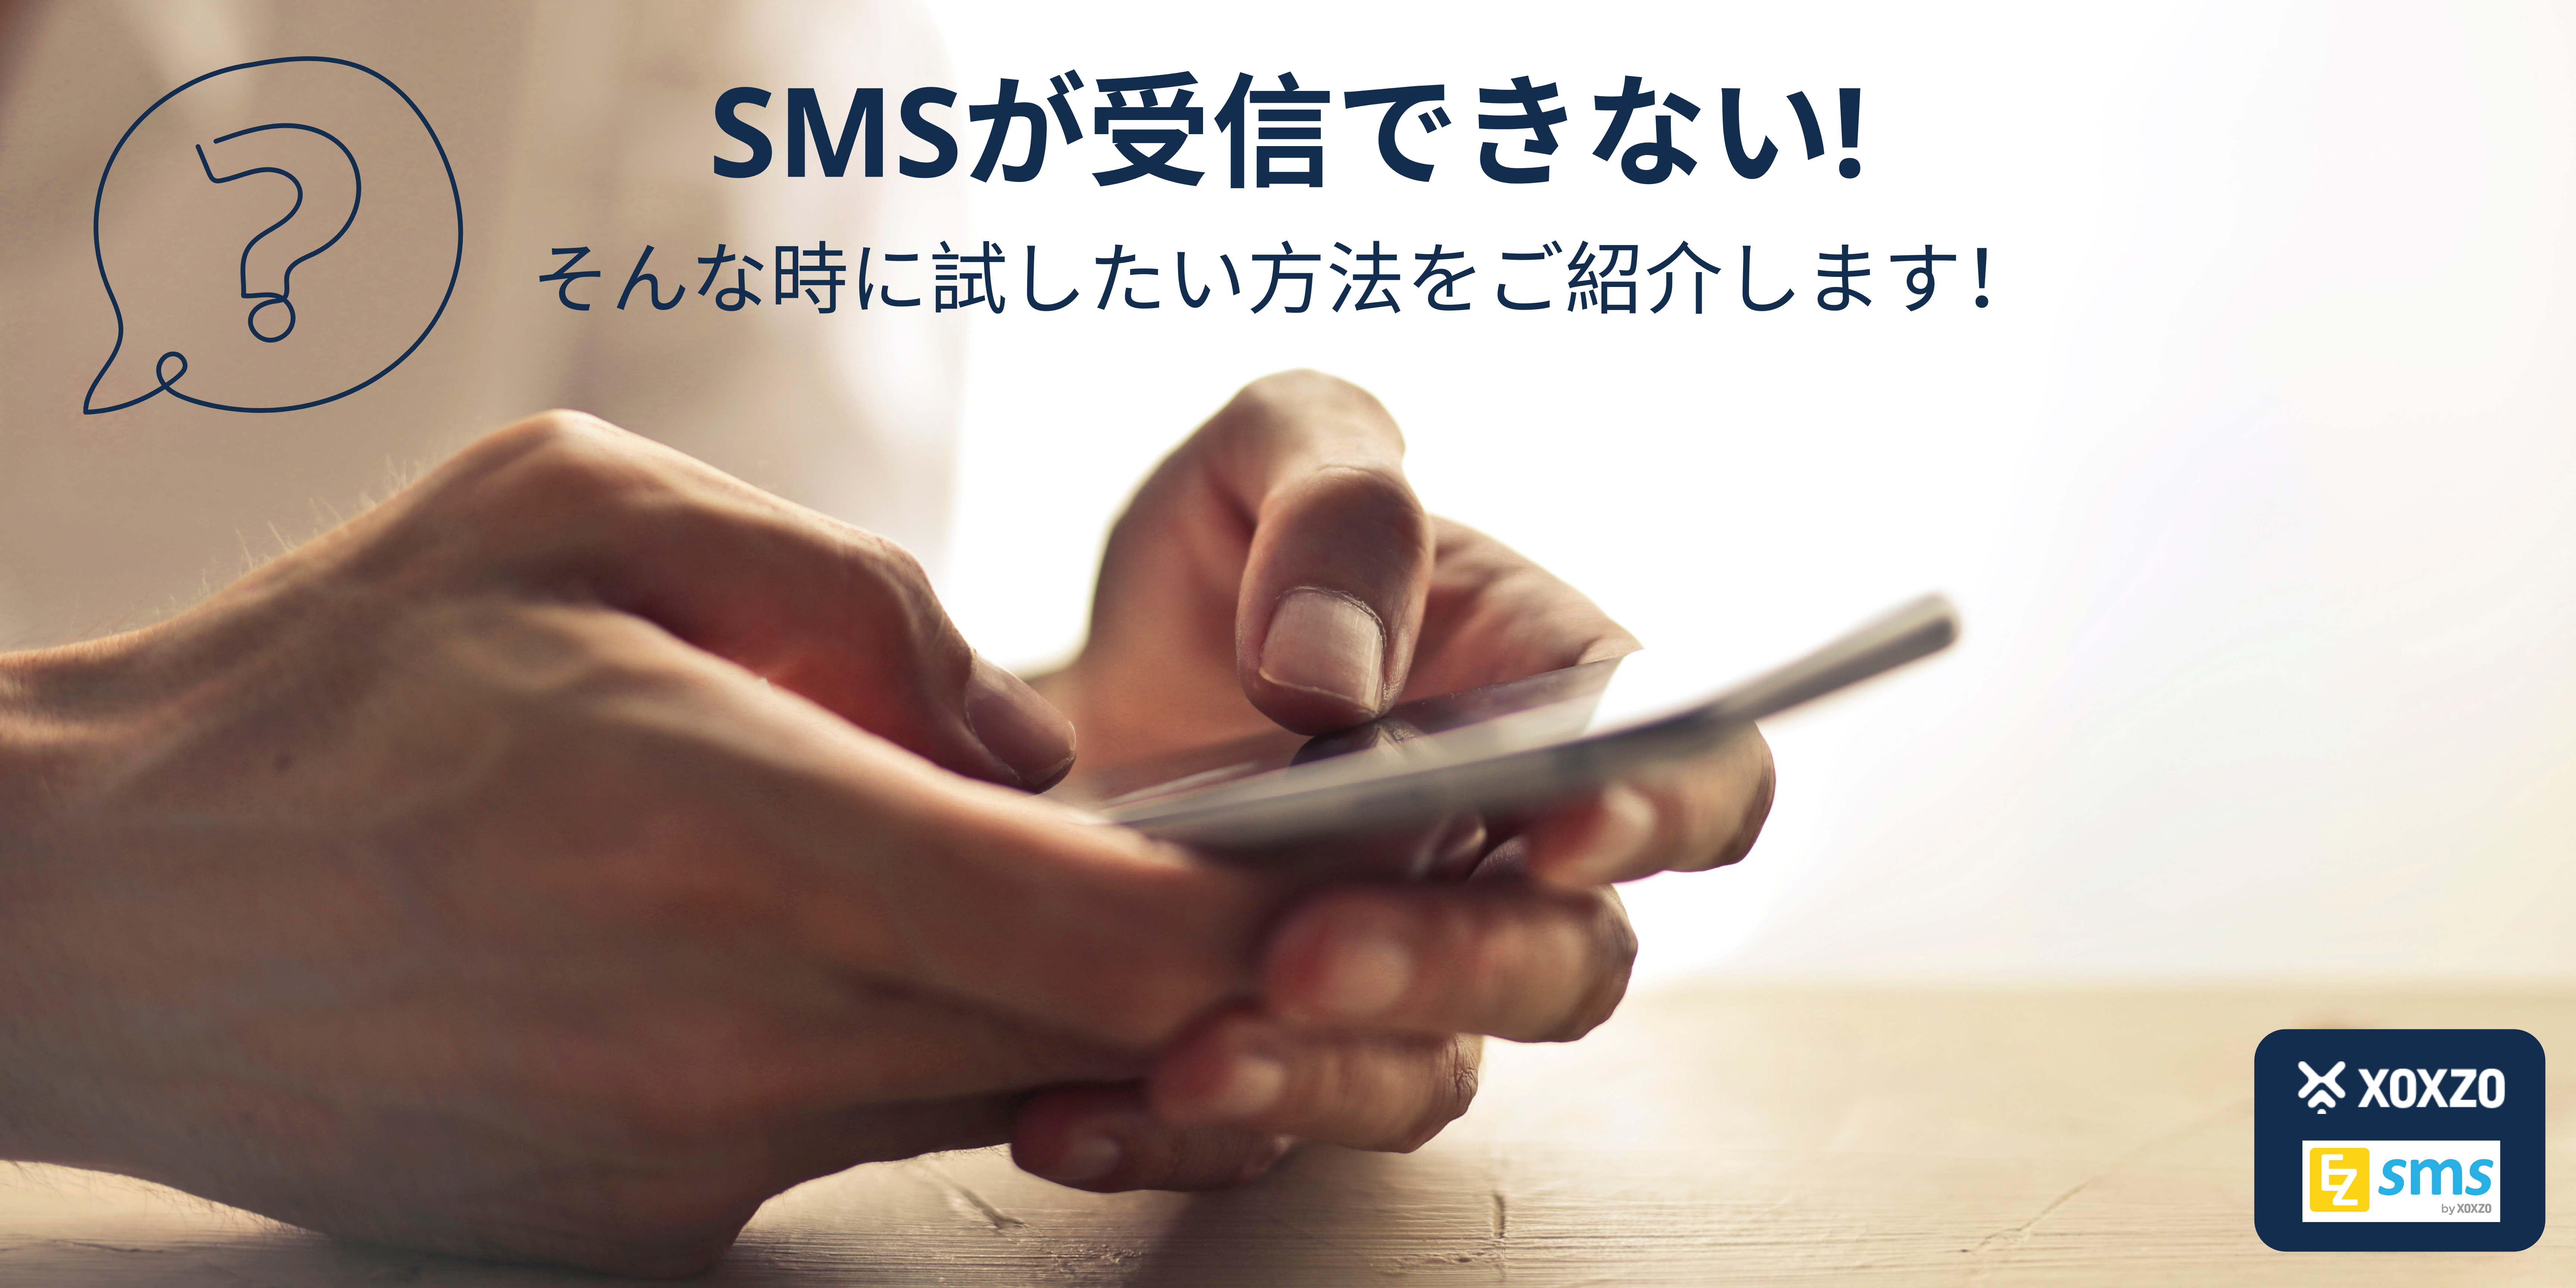 sms-receiving